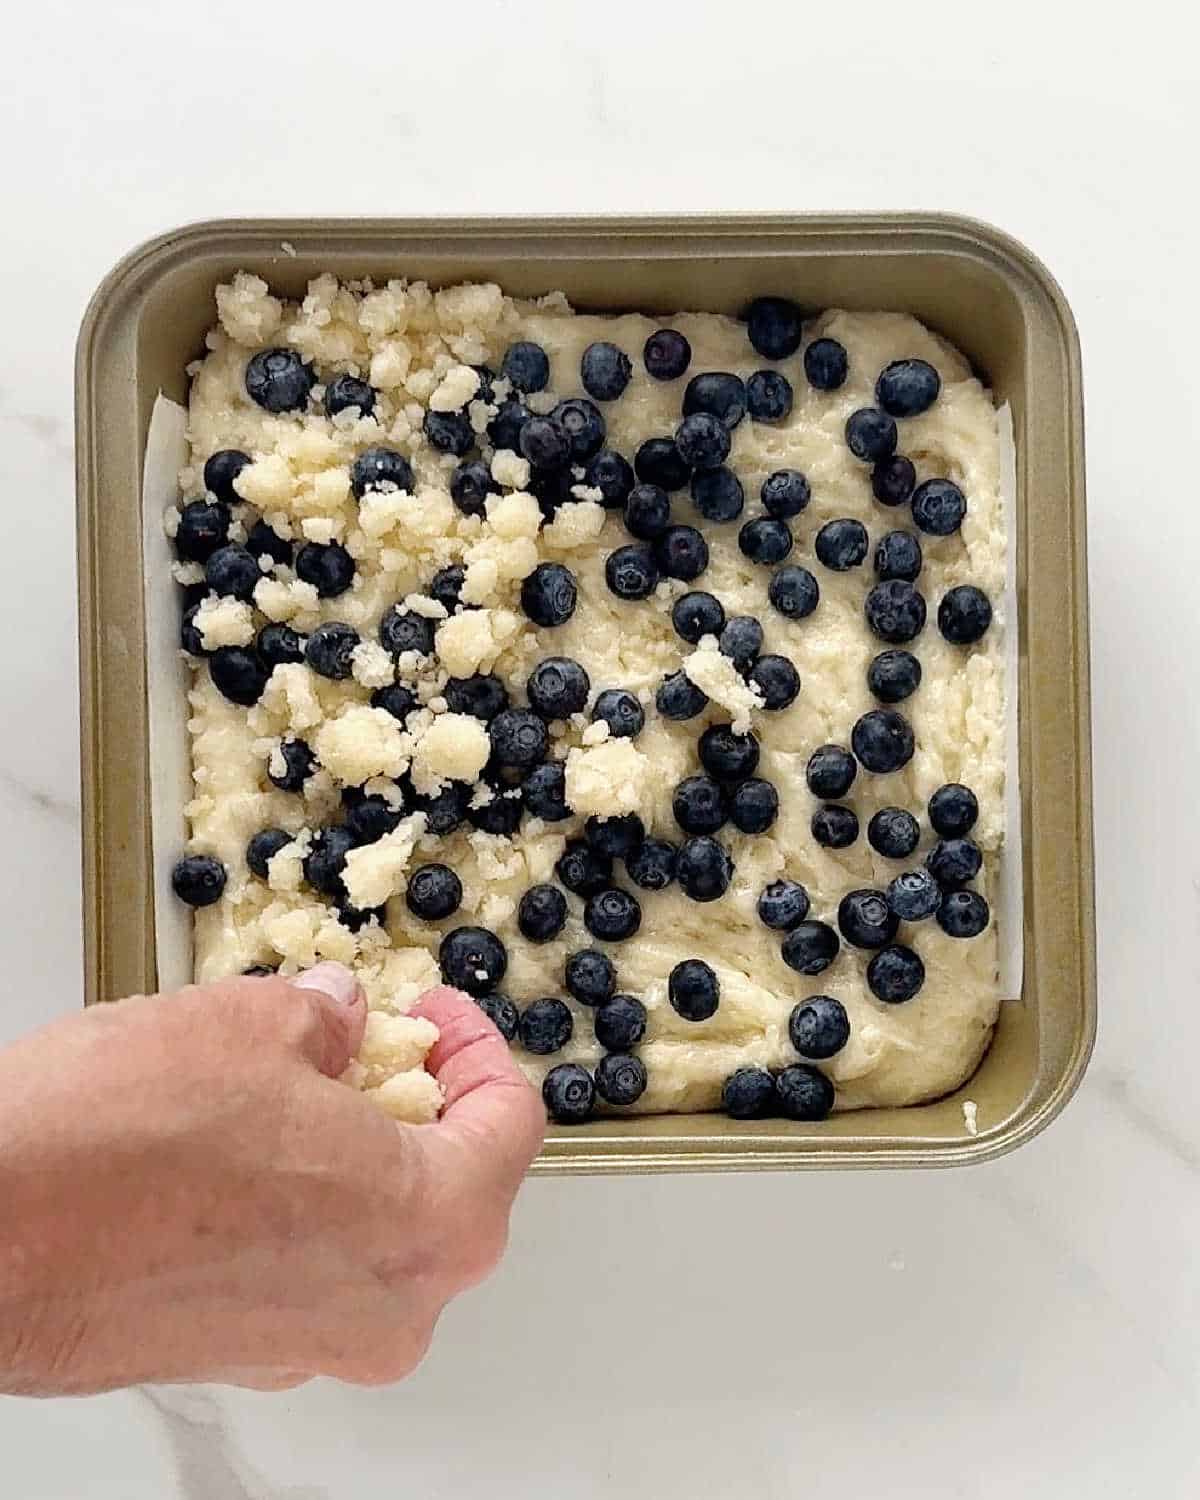 Scattering crumble topping to a blueberry cake in a square metal pan on white marble.